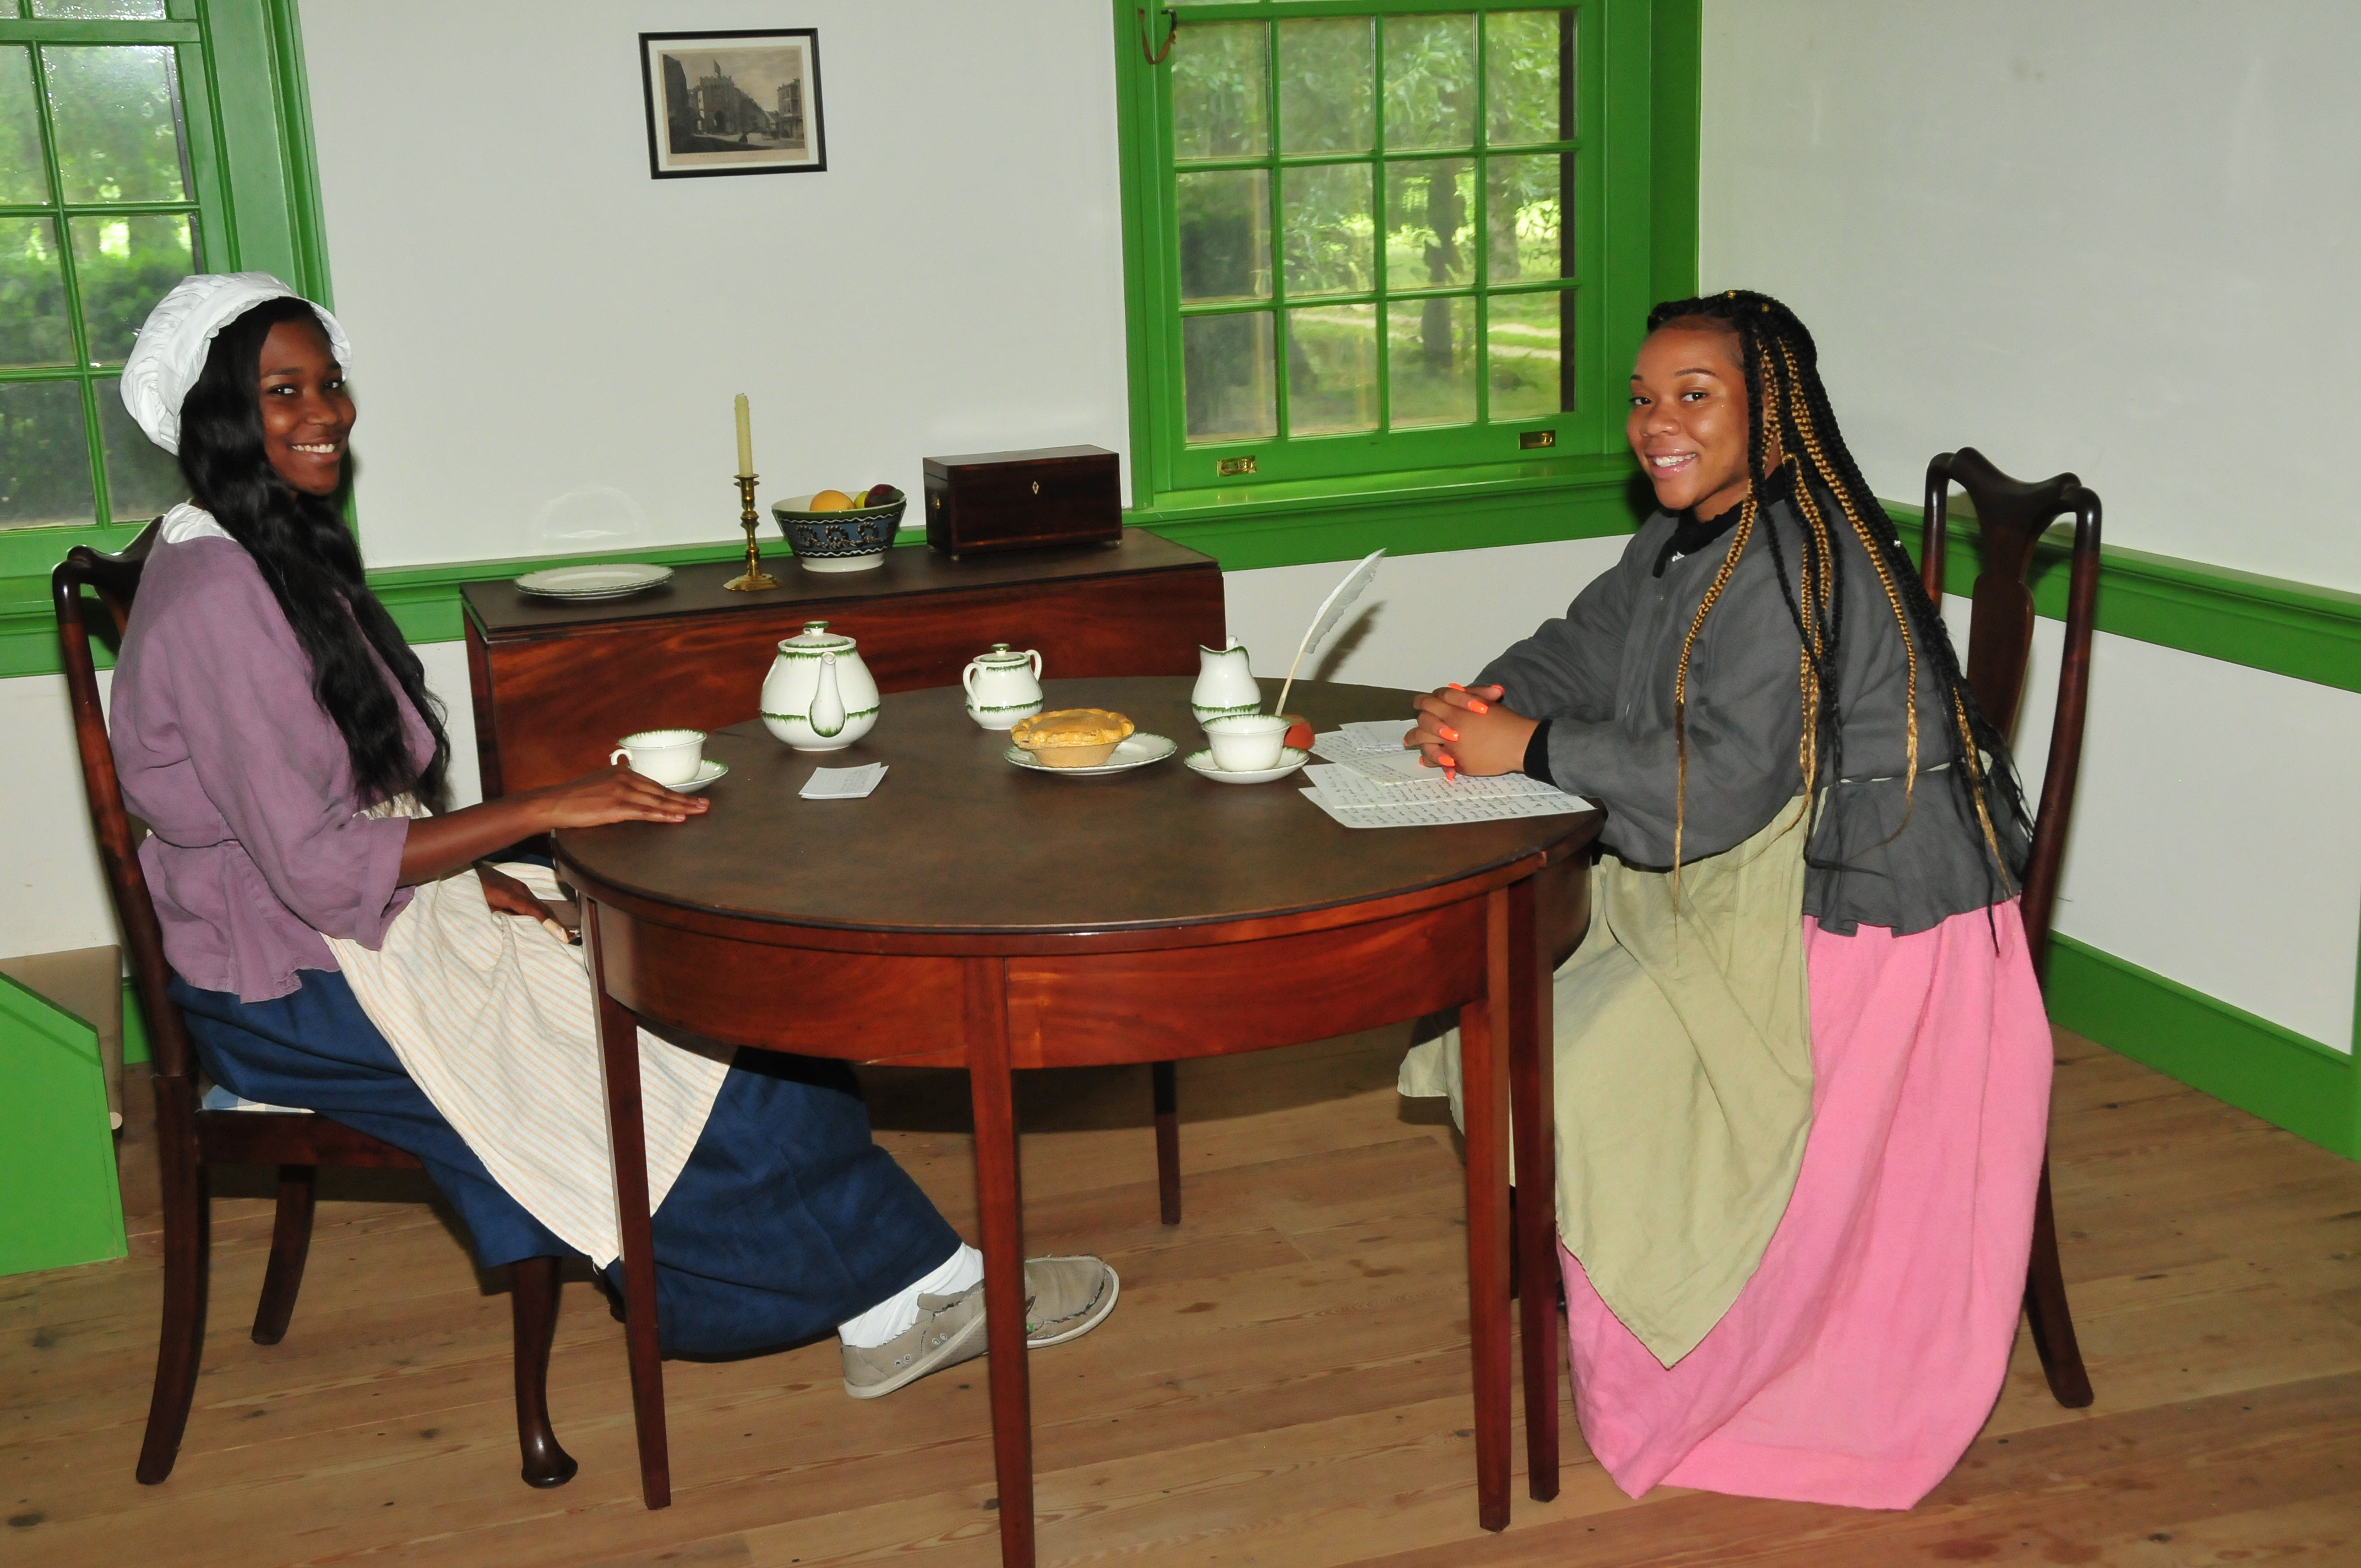 Izhane Wilson and Yazmin Harris depict life in the 1700s at the John Dickinson Plantation